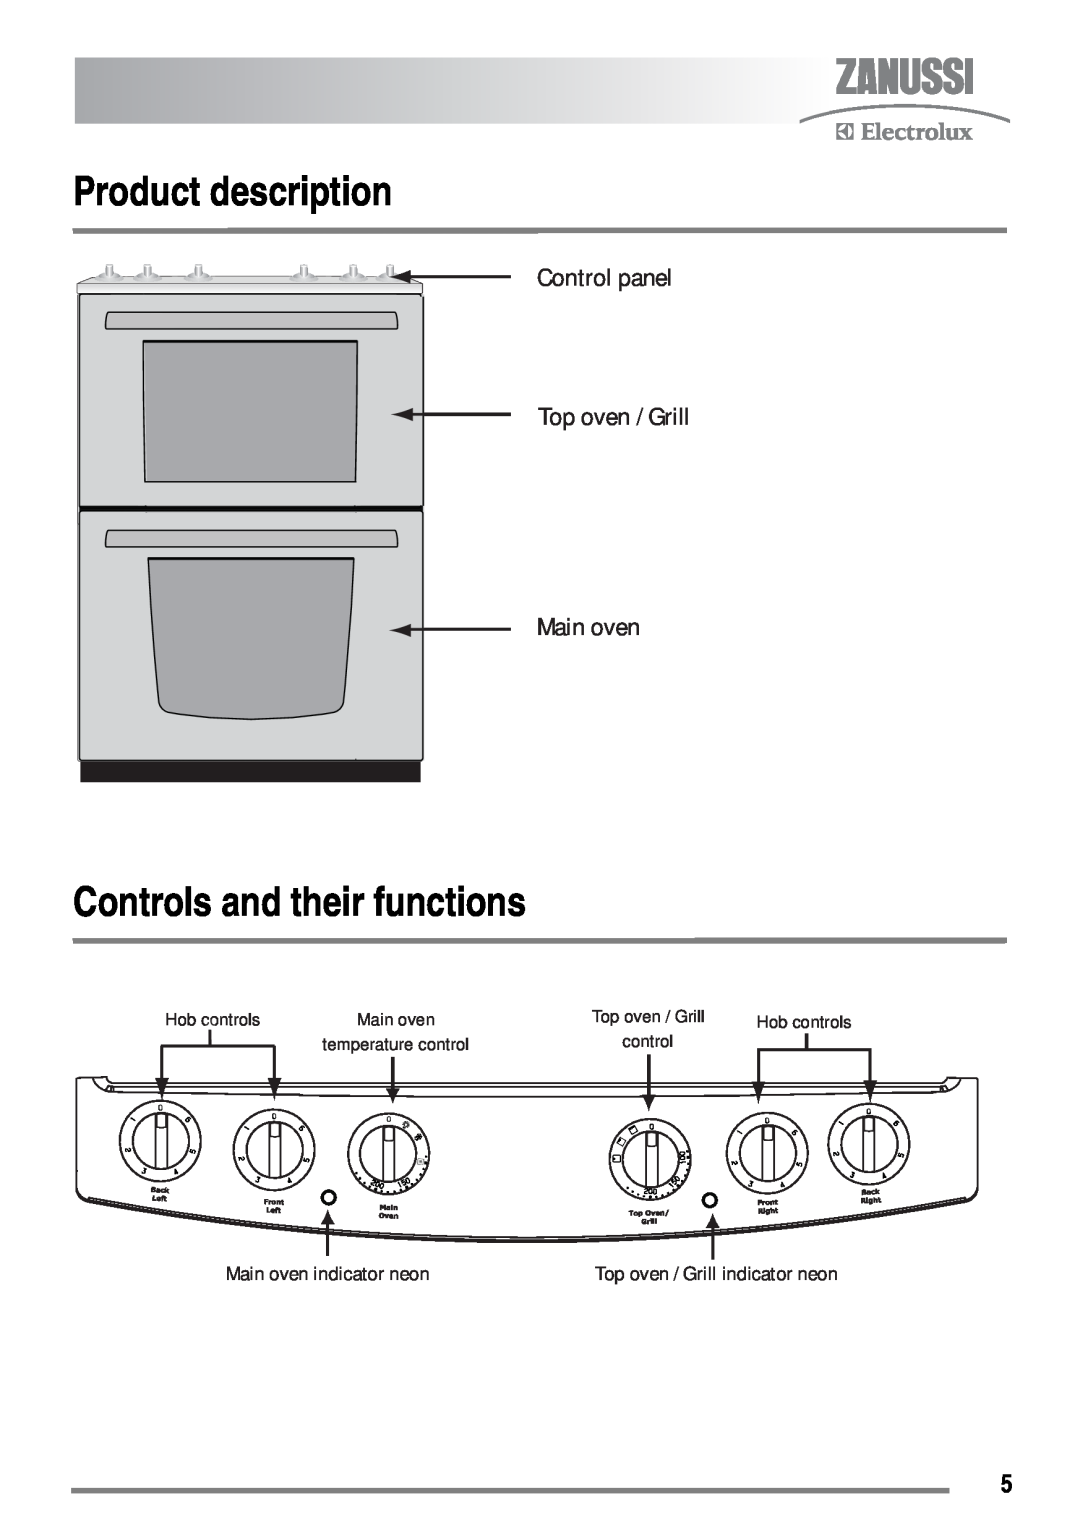 Zanussi ZKC6010 Product description, Controls and their functions, Control panel Top oven / Grill Main oven, control 